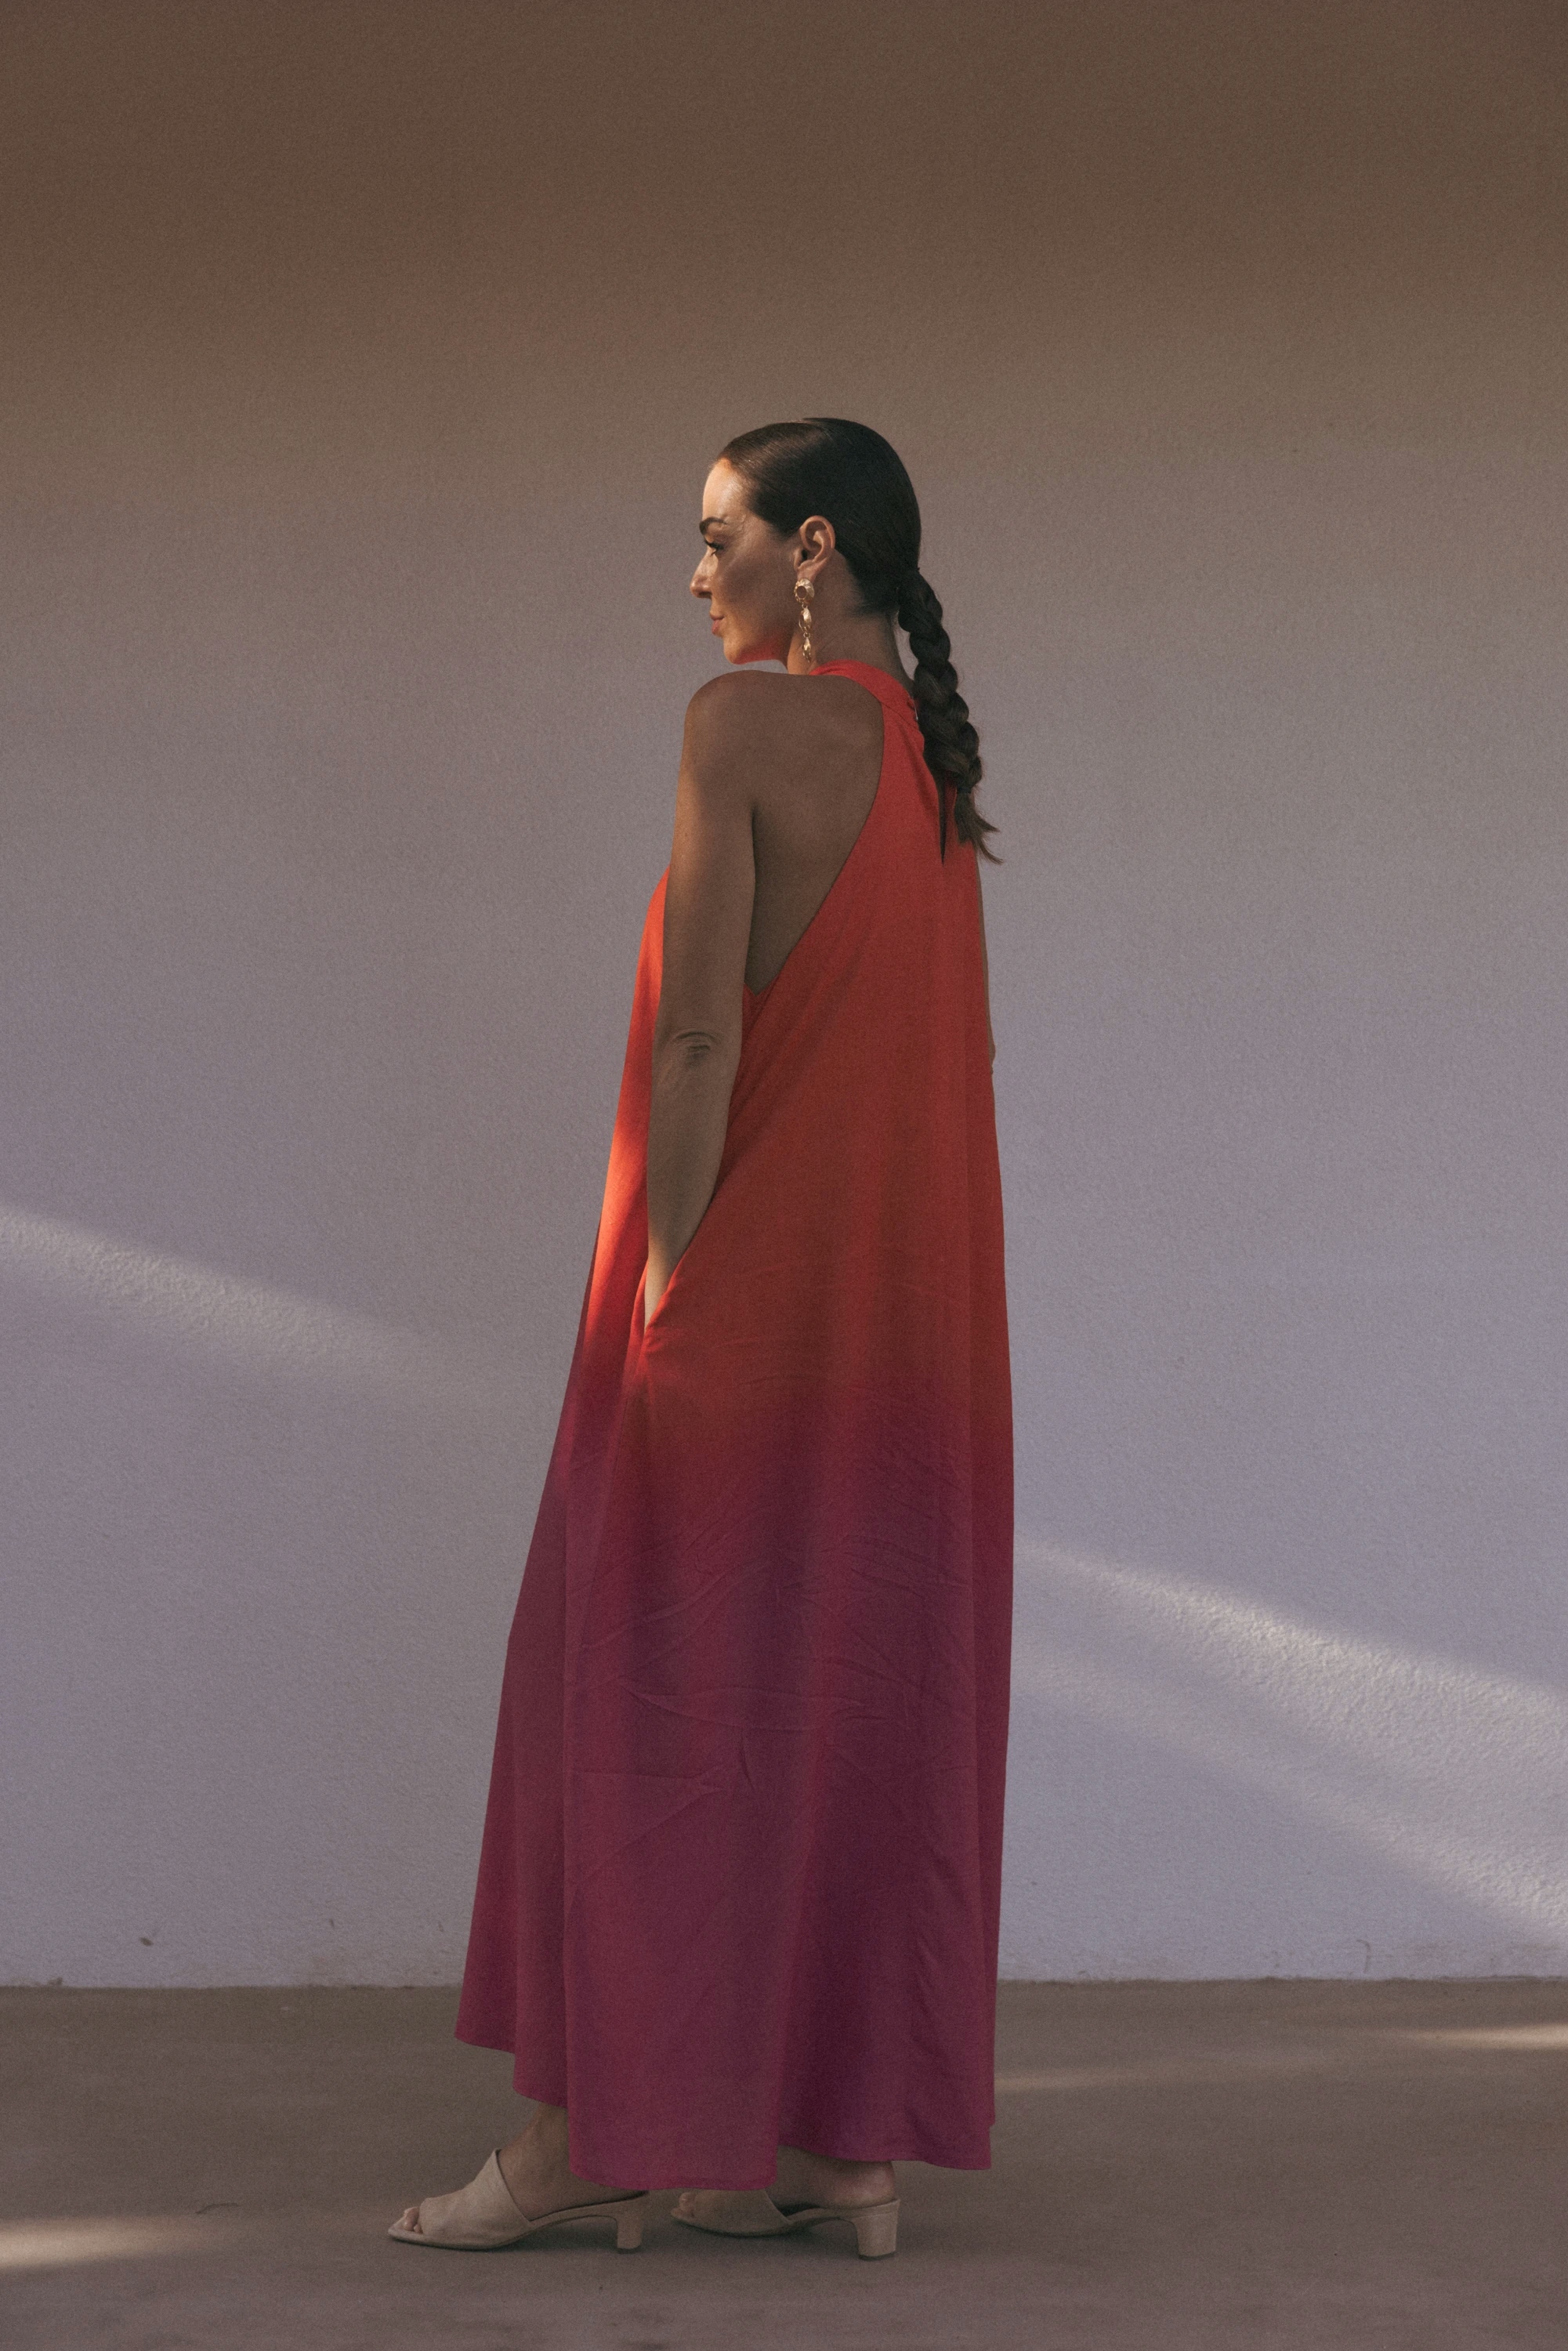 Sienna and Vanessa offer mesmerizing gradient dresses that bring fresh elegance to sunny days and balmy evenings.